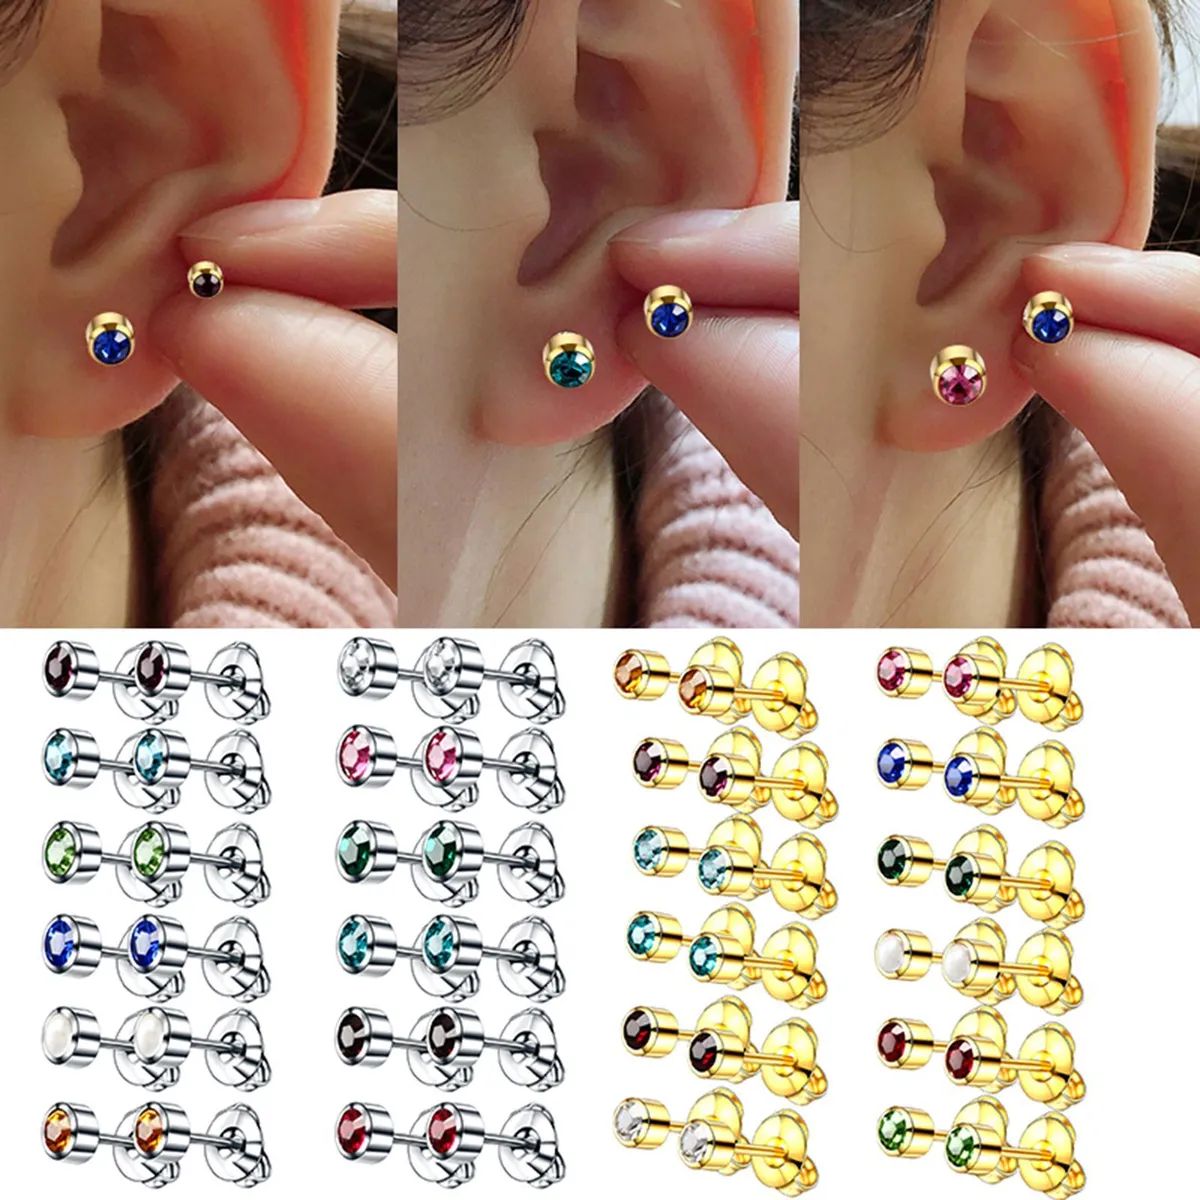 Ear Piercing Kit – Earrings and Aftercare Kit | Claire's CA-sgquangbinhtourist.com.vn